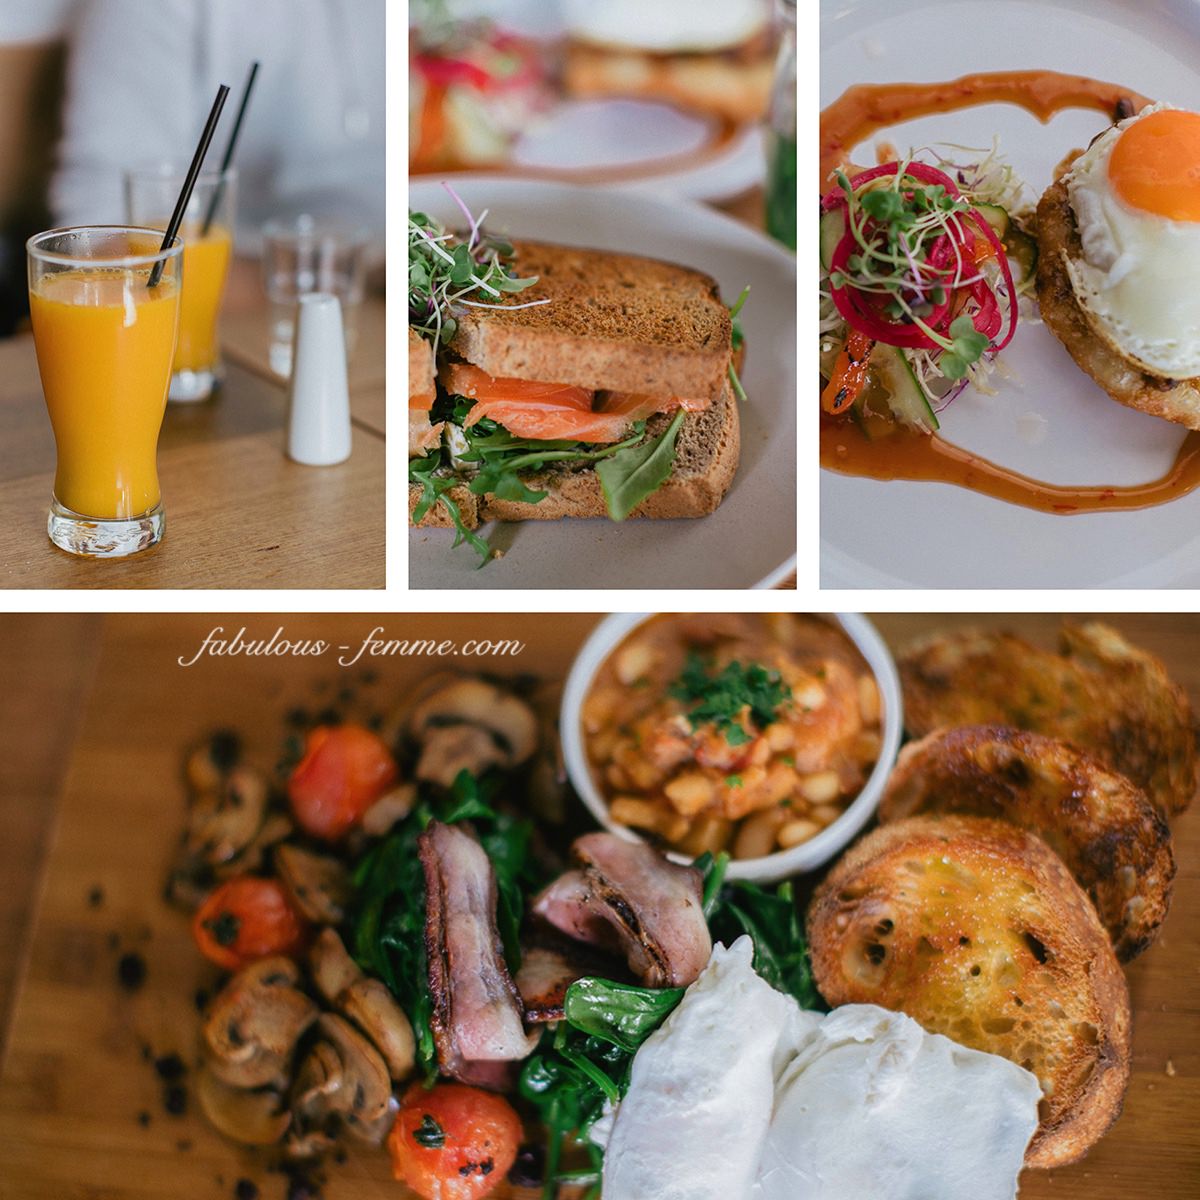 brunch menu - creative and yummy - one of the best in Melbourne